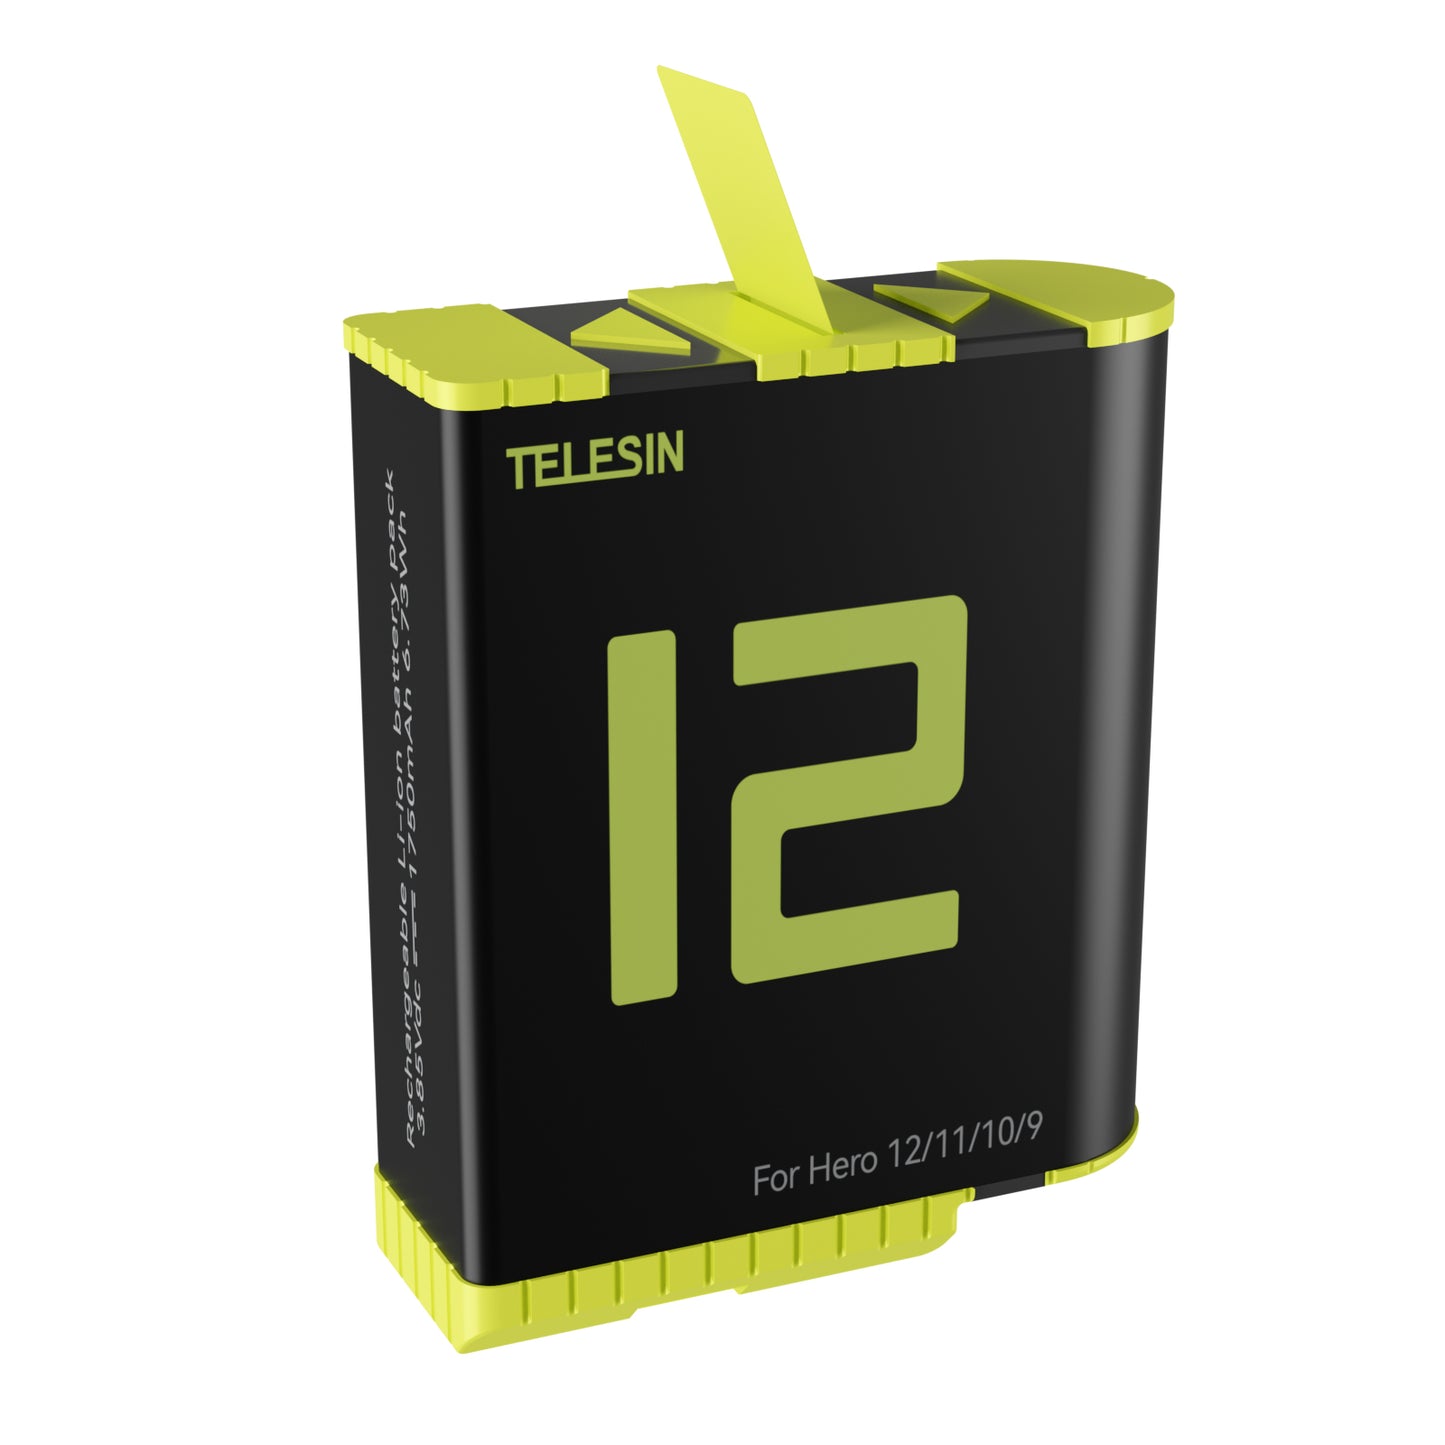 Telesin Charging box with 2 batteries for GoPro 9/ 10 / 11 / 12